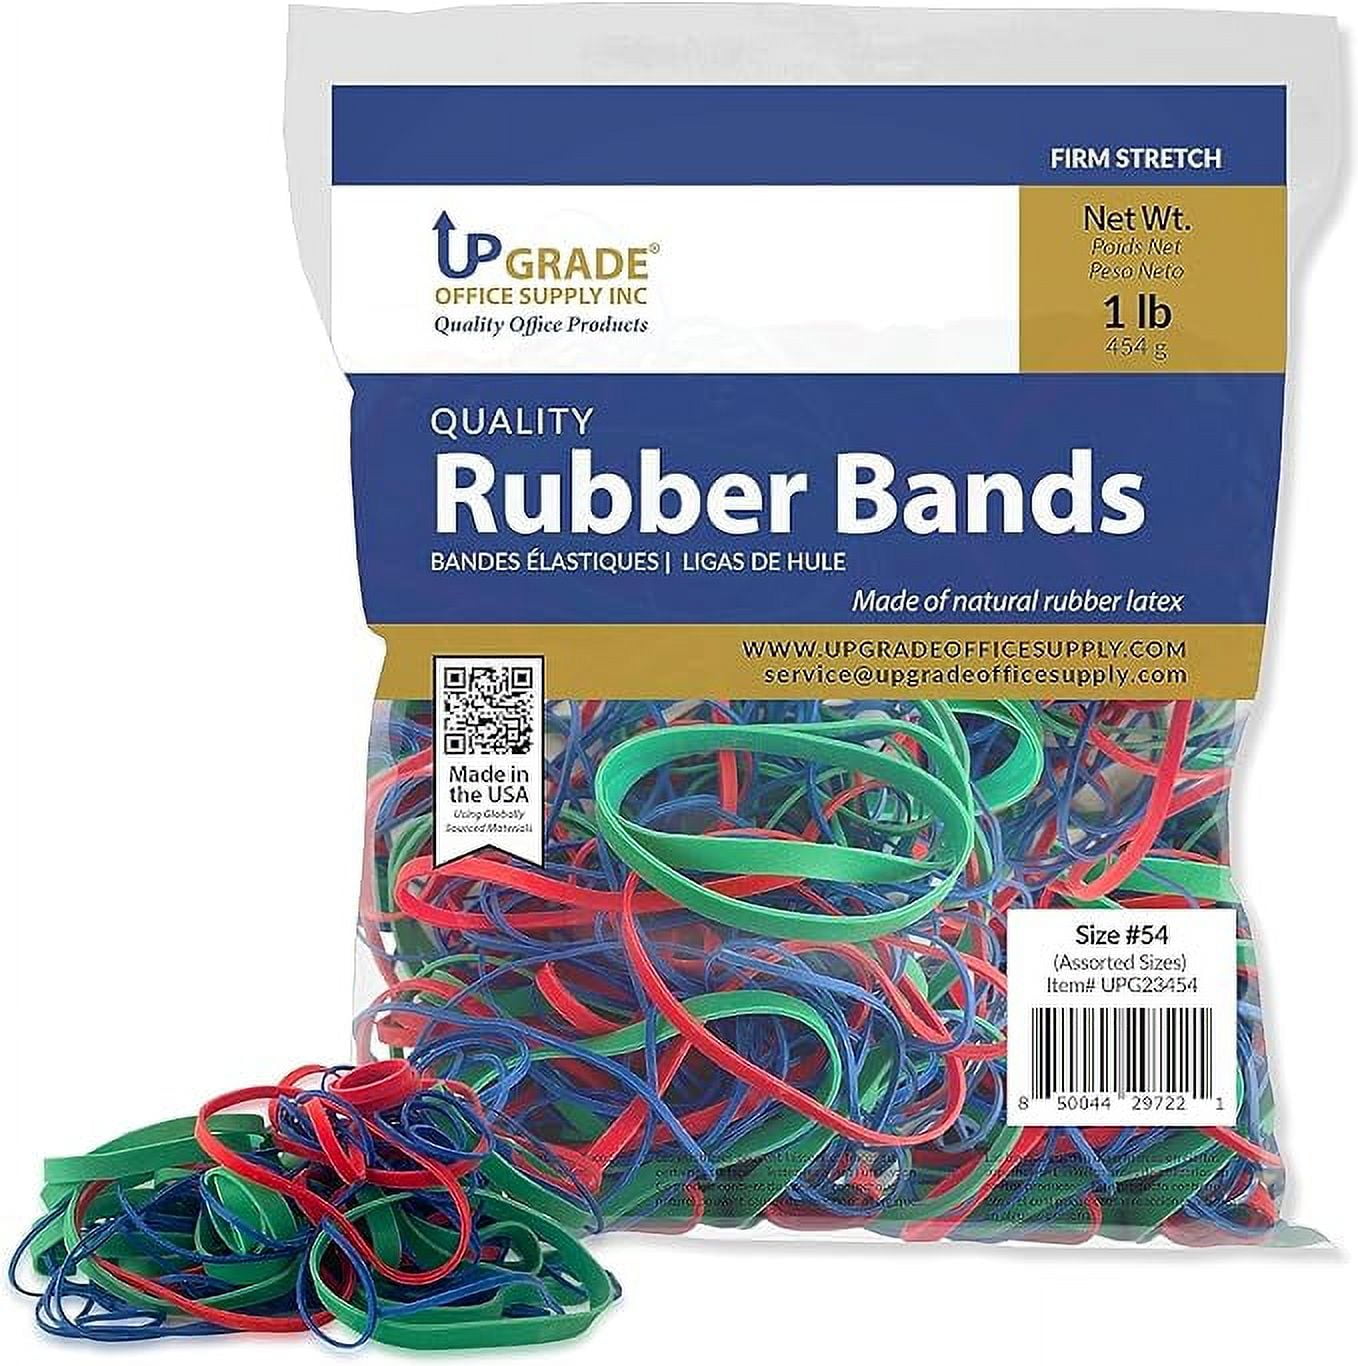 Alliance Rubber 07825 SuperSize Bands - Large 12 Heavy Duty Latex Rubber  Bands - For Oversized Jobs - Red - Approx. 50 Bands in Box - Reliable Paper